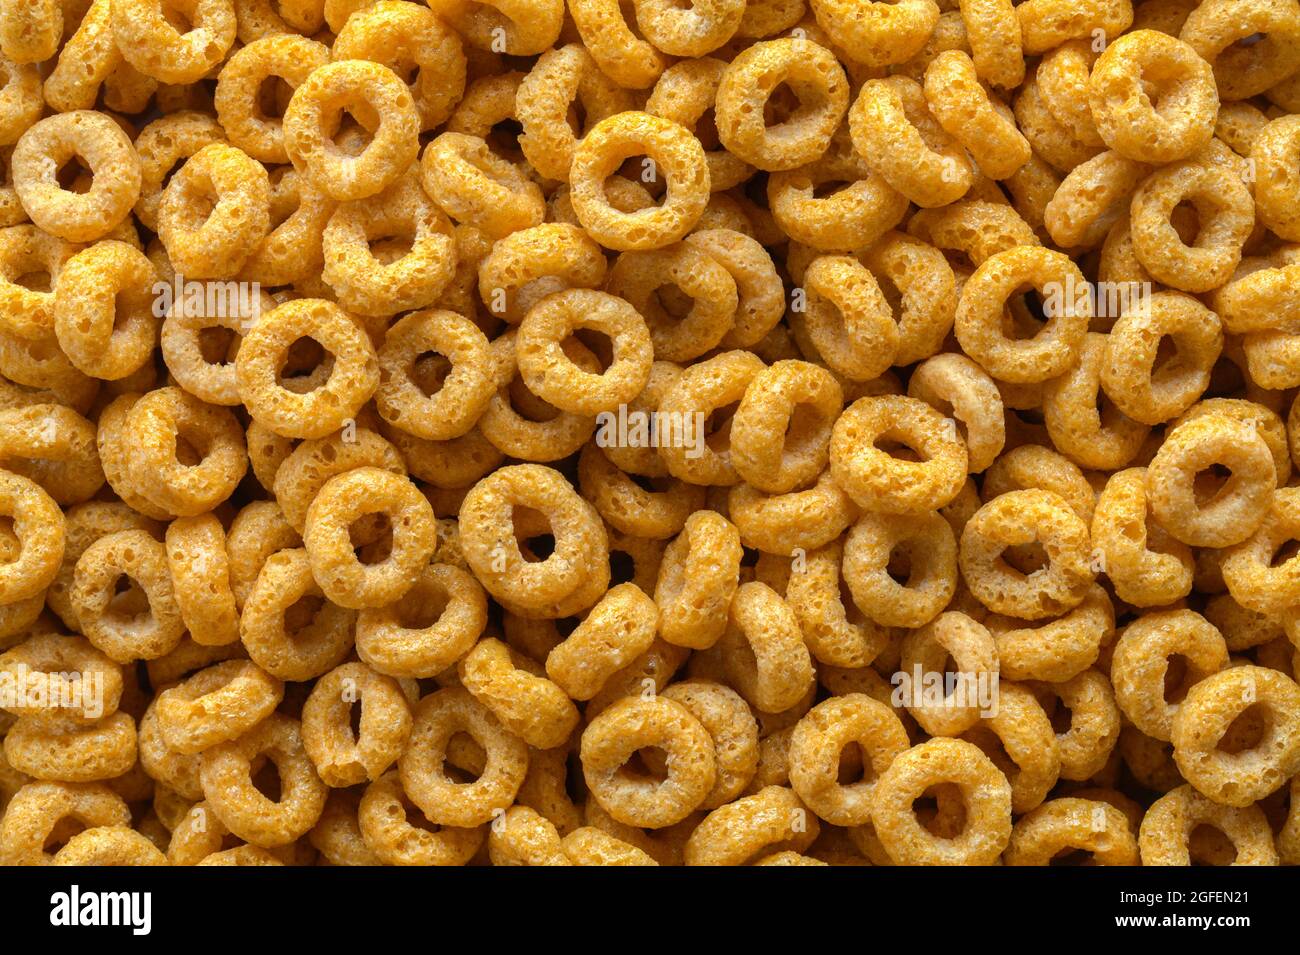 Pile of Loop Oat Breakfest Cereal Background Texture. Stock Photo